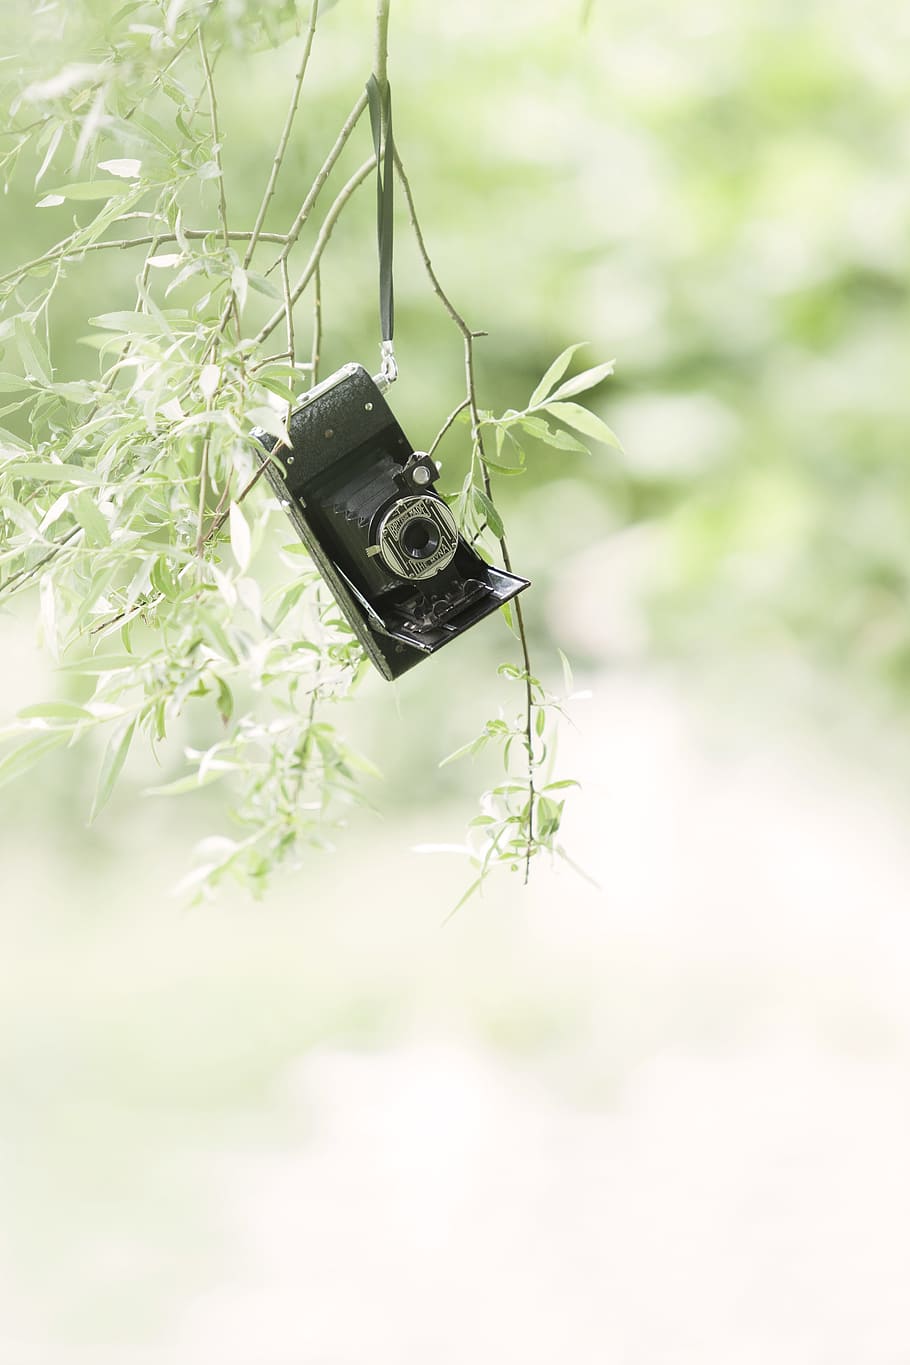 black, camera, branch, photo camera, vintage, old, antique, shooting, photography, hobby